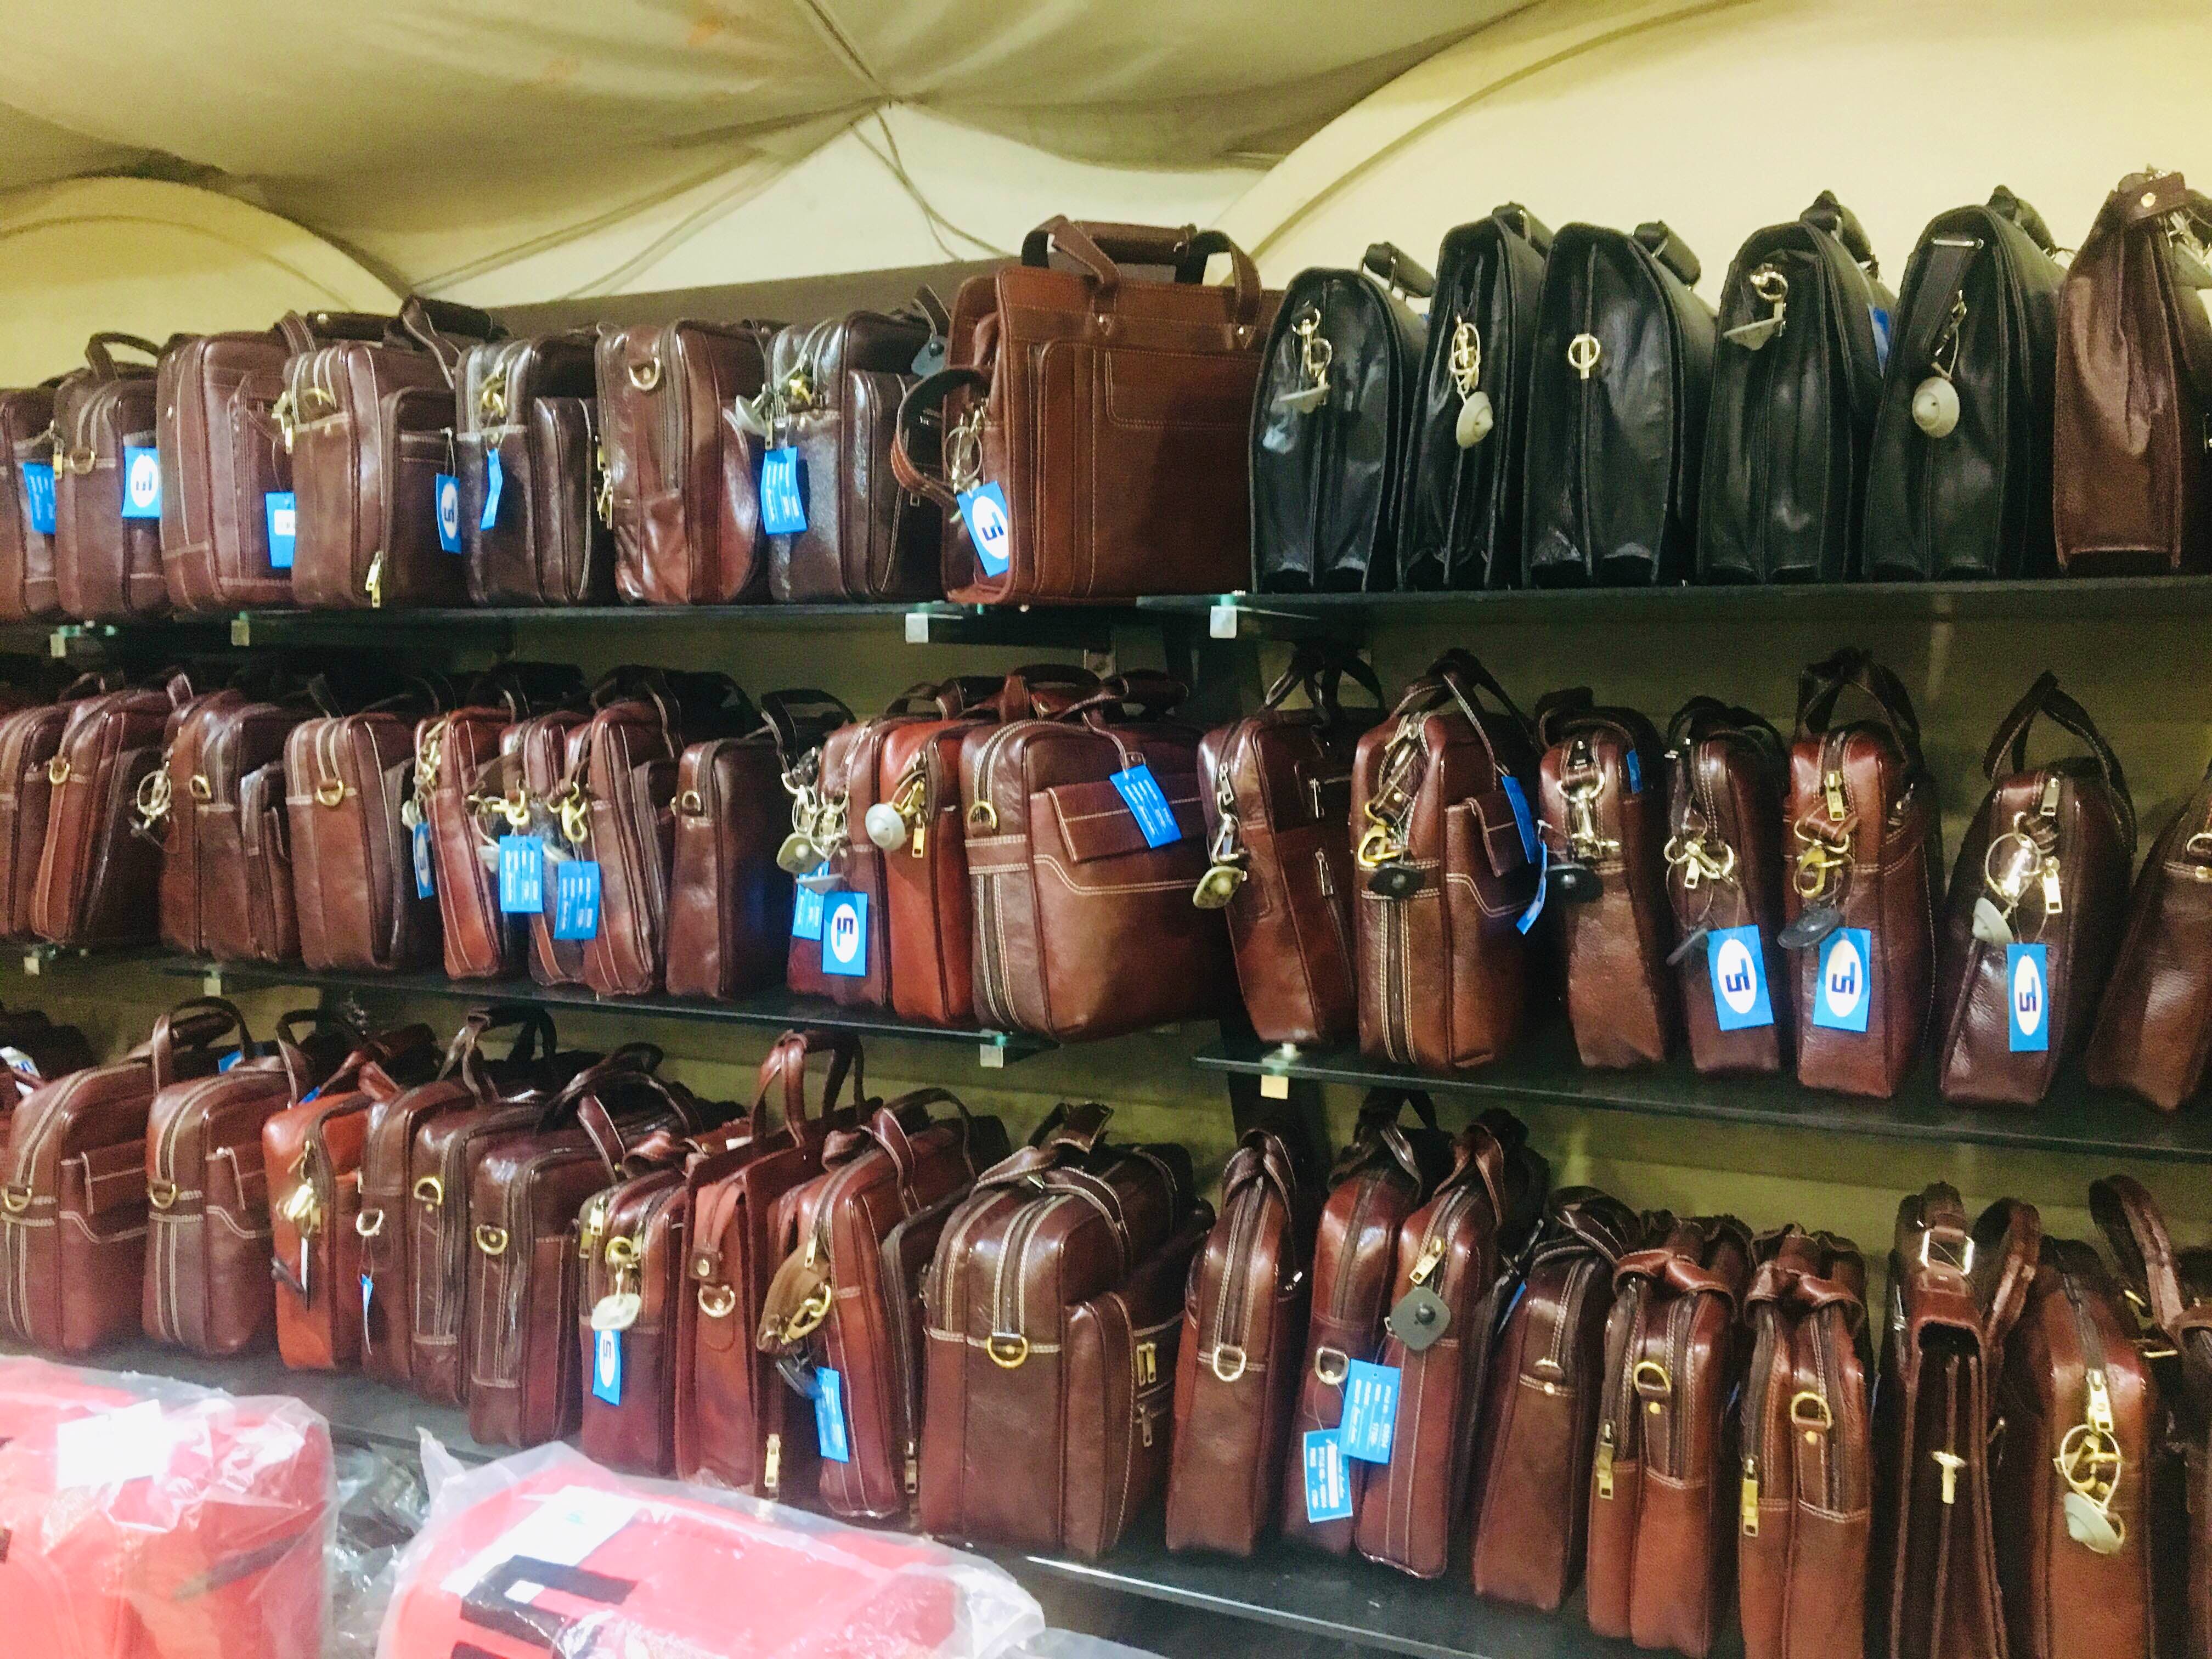 shree leather showroom in connaught place